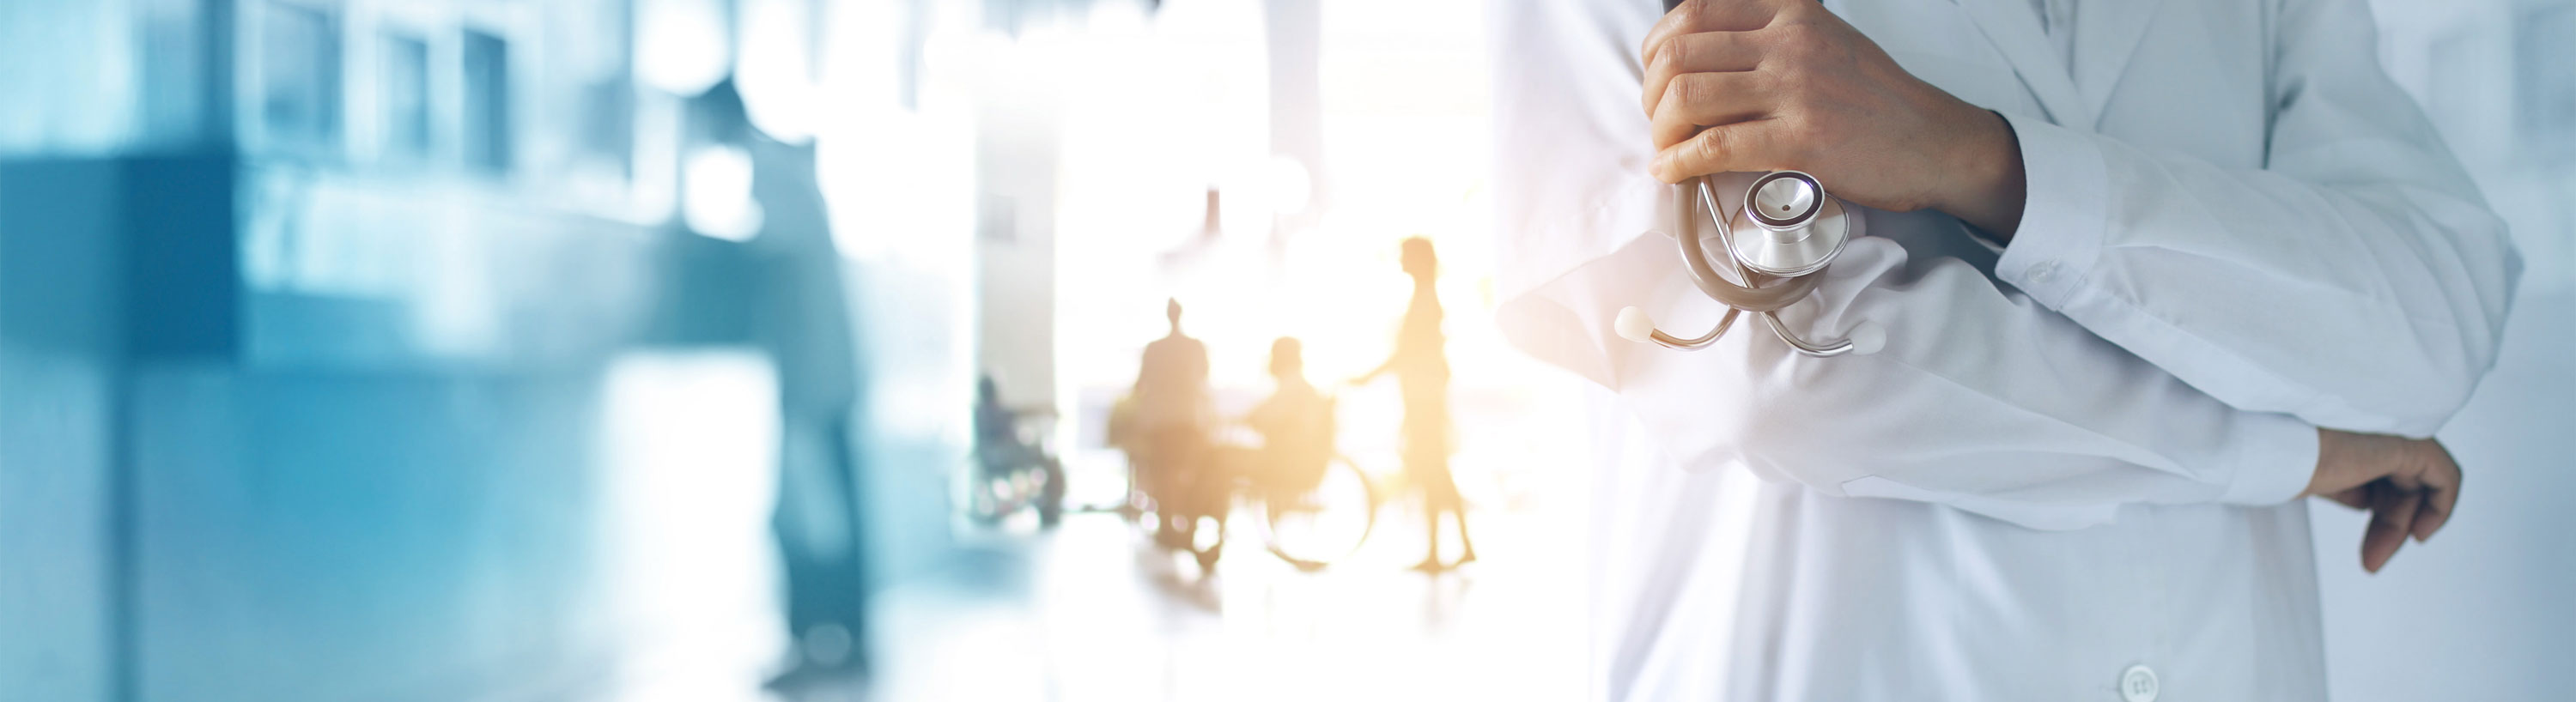 Banner picture of a male Physician standing in a hospital lobby and holding a stethoscope in one hand. There is a blurred background of a woman pushing a man in a wheelchair and a man standing up at the front desk counter.